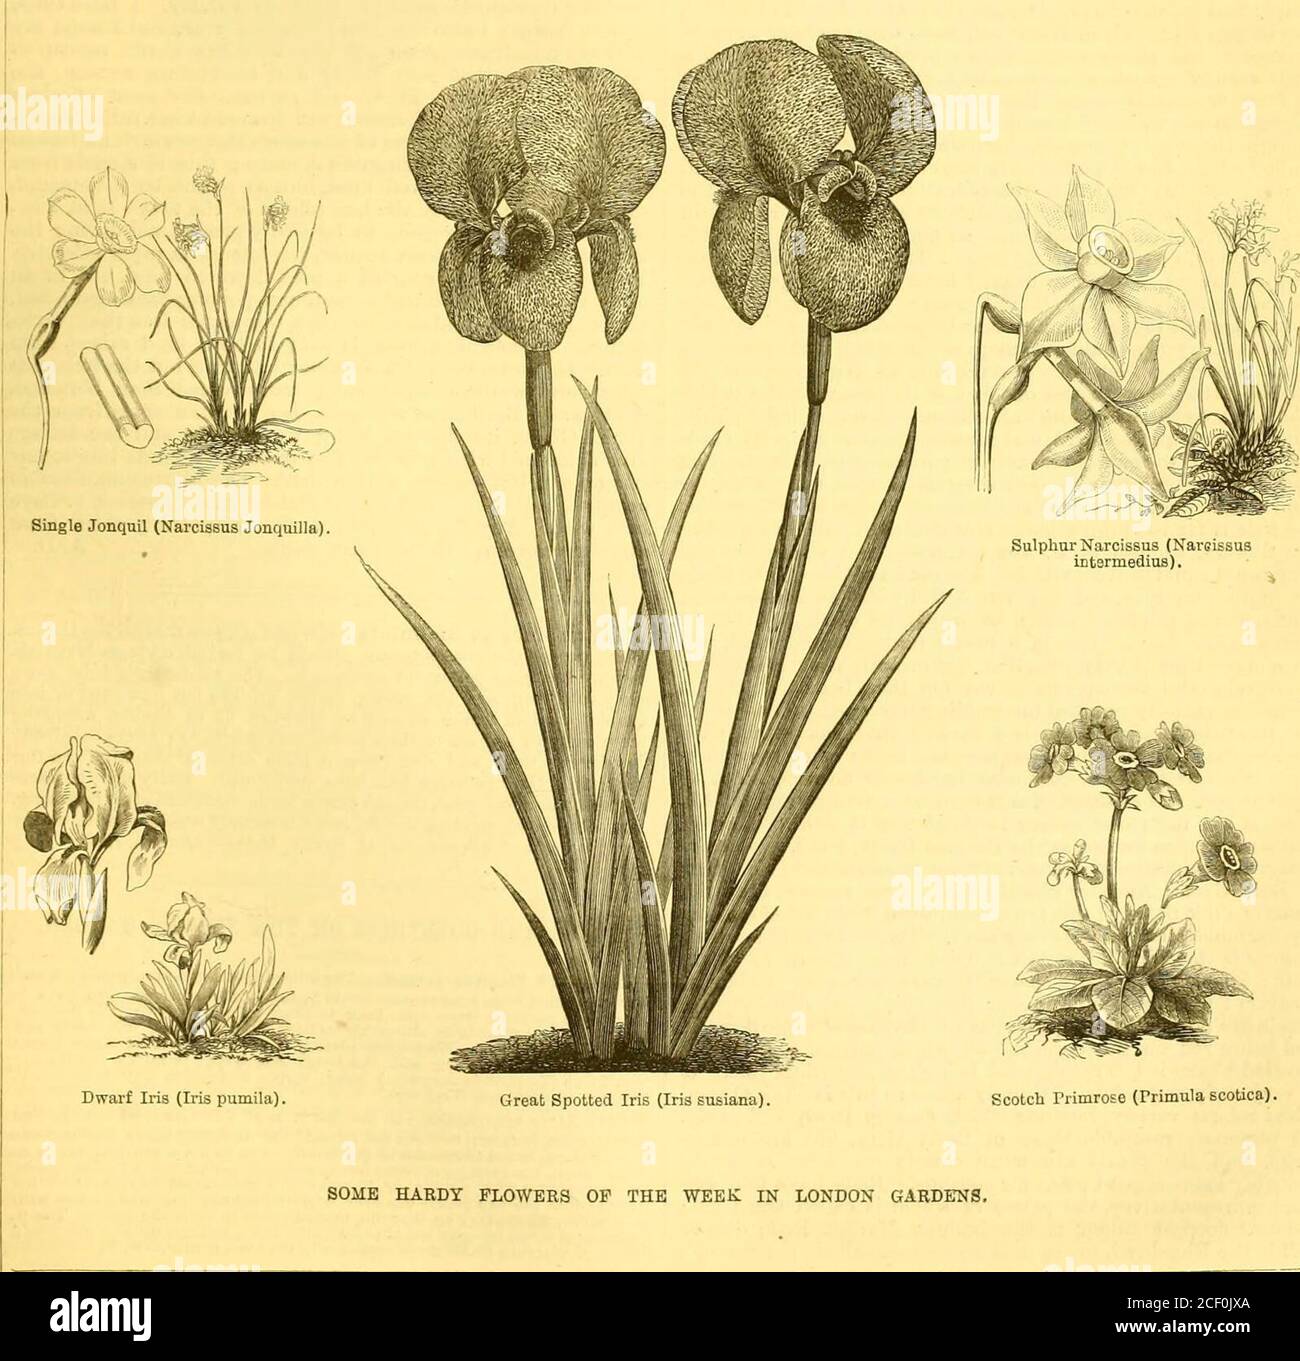 The Garden An Illustrated Weekly Journal Of Gardening In All Its Branches Alpine Forget Me Not Myosotisalpestria Suowy Primrose Primula Nivalis Musk Scented Grape Hyacinth Muscari Moschatam Scotch Primrose Primula Scotica Soile Hardy Flowers